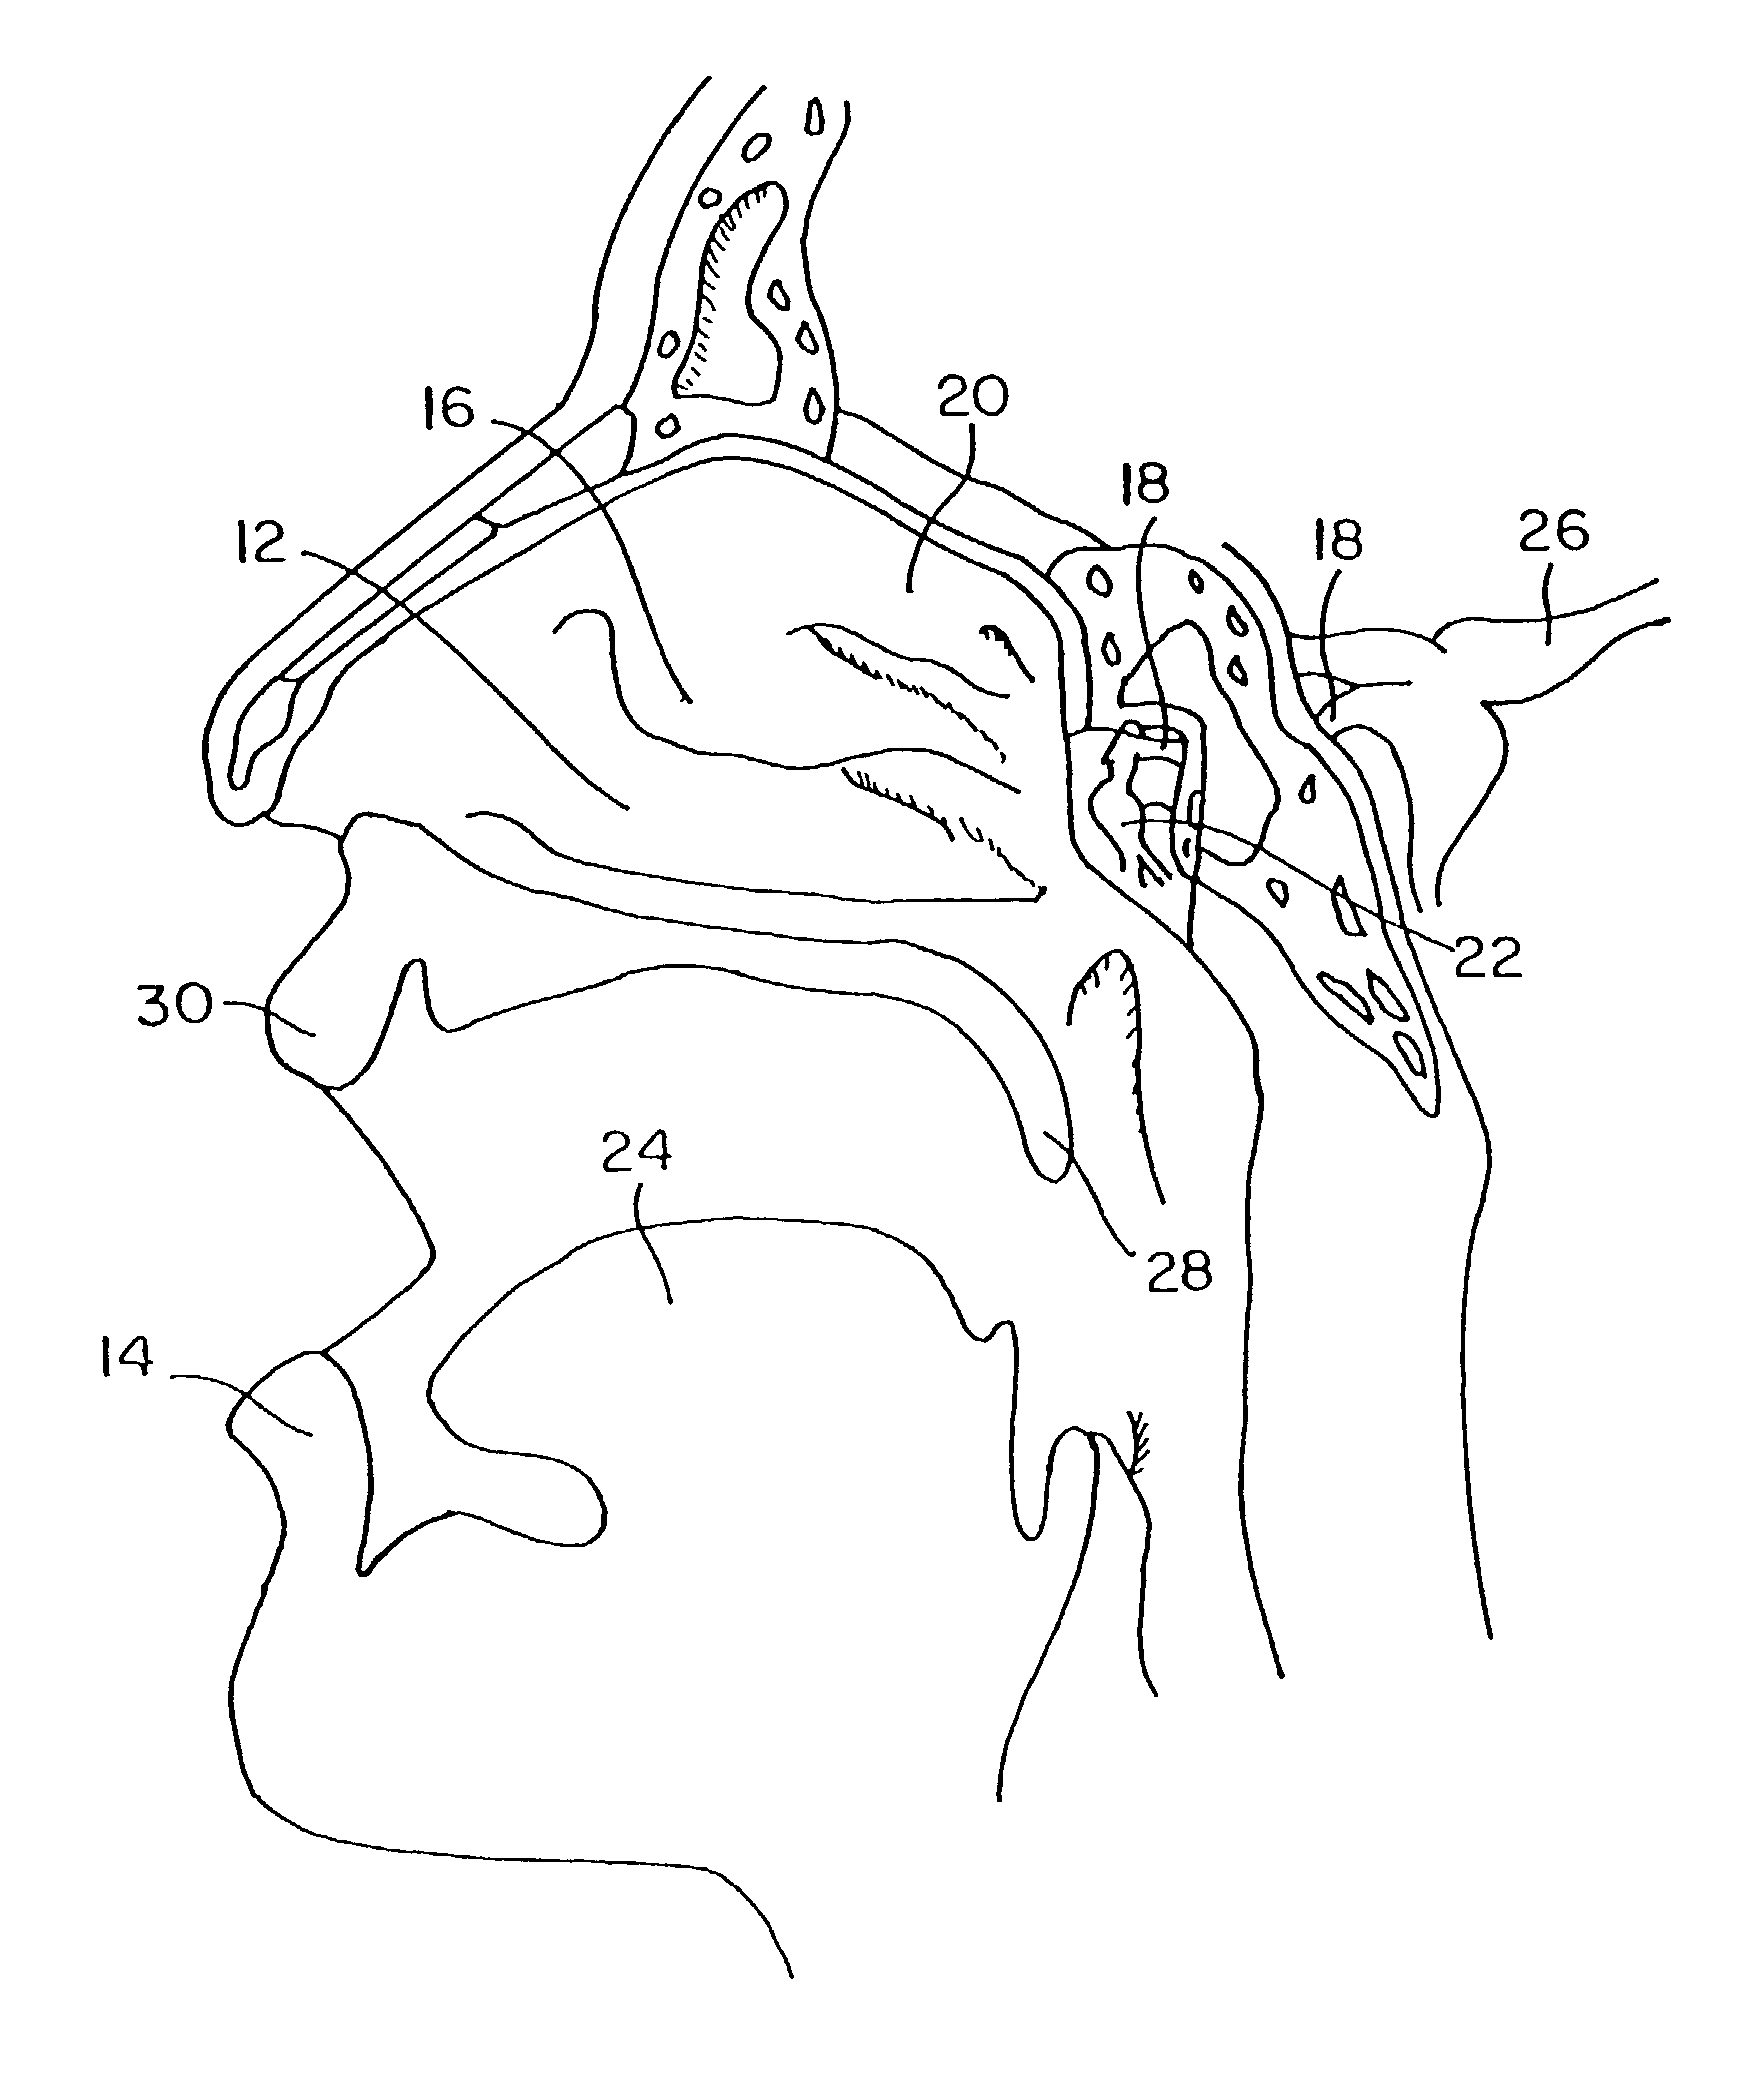 Method for directed intranasal administration of a composition